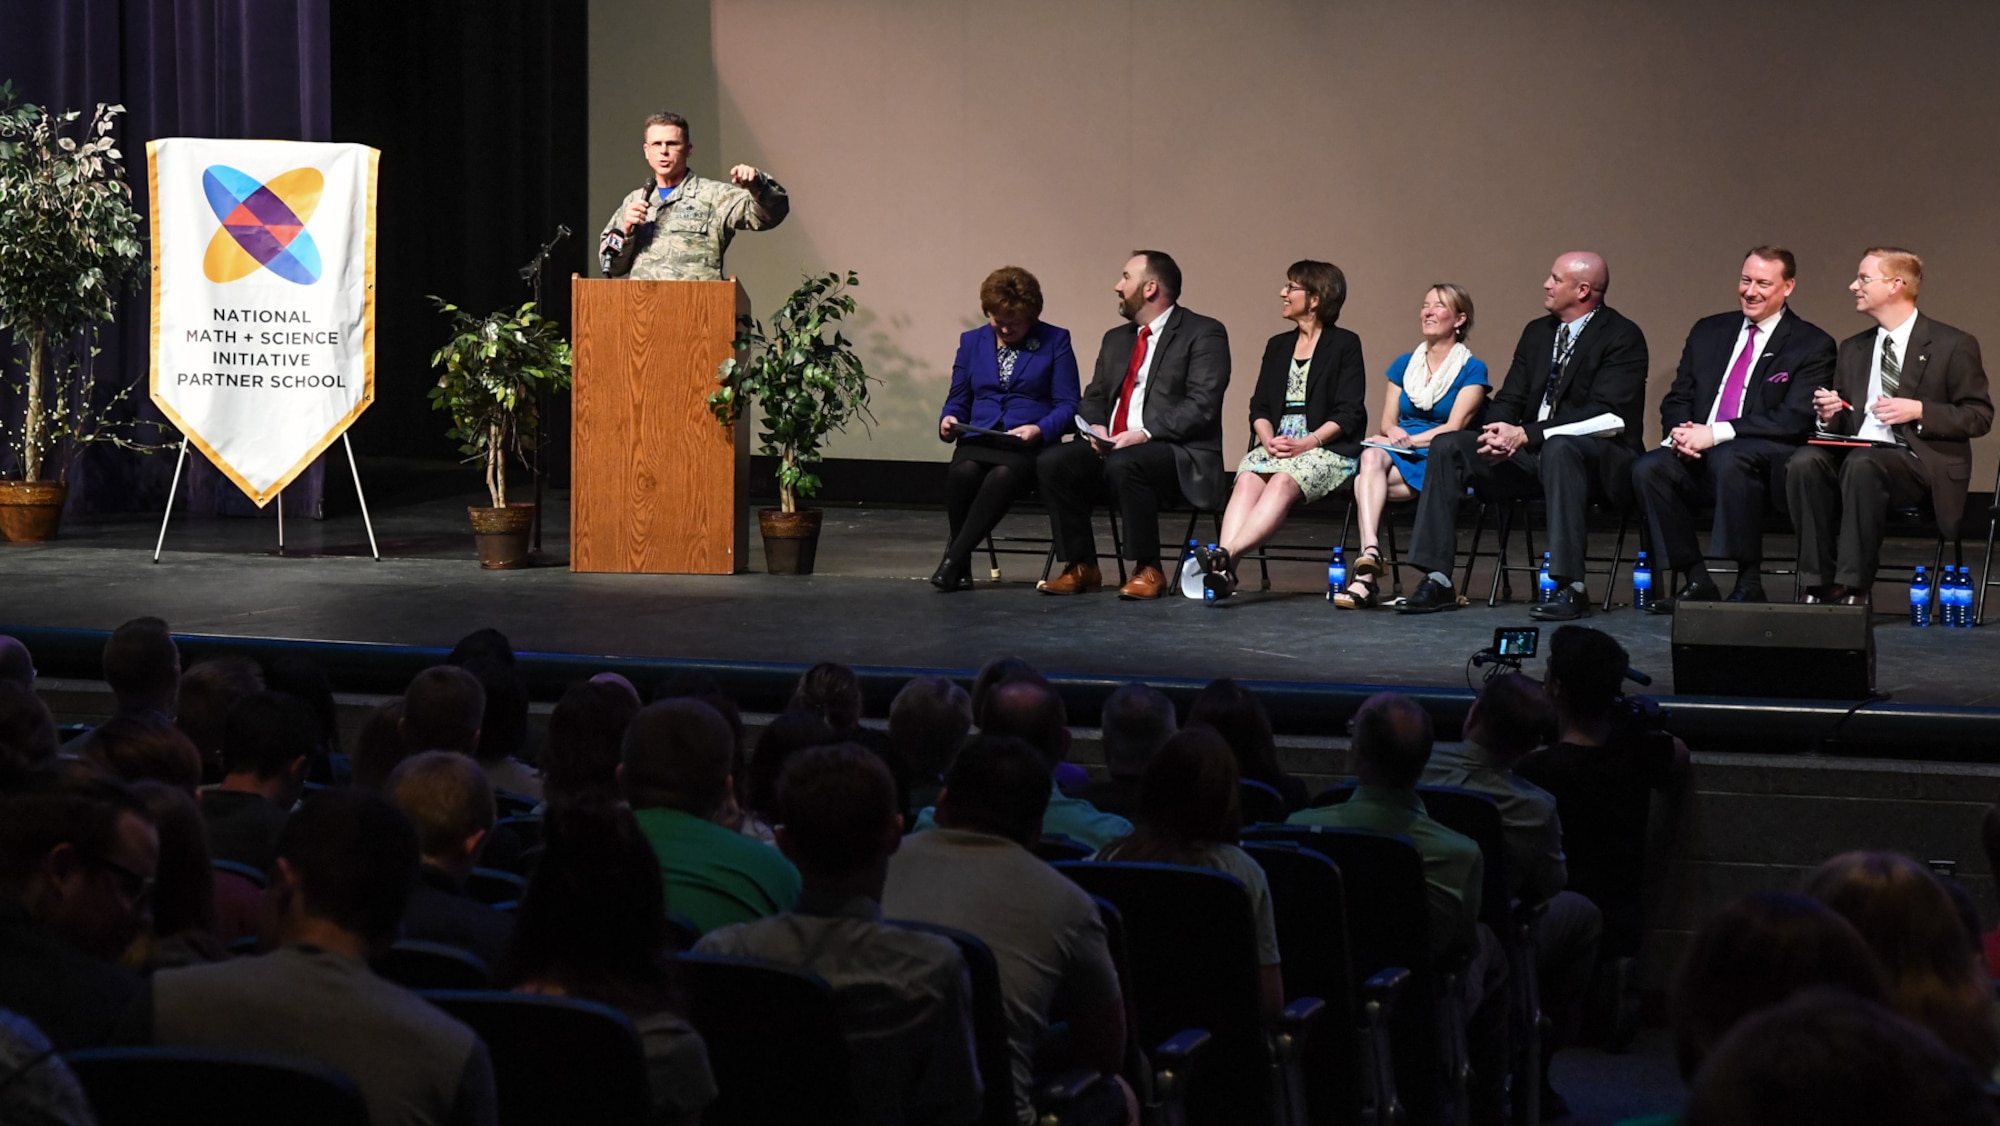 Brig. Gen. Steven Bleymaier, commander of Hill's Odgen Air Logistics Complex, speaks during a National Math + Science Initiative funding presentation at Syracuse High School, Utah, March 17, 2017. This is the first time NMSI has funded students in Utah. The majority of the investment will fund NMSI College Readiness Programs at Northridge and Syracuse High Schools. (U.S. Air Force photo/ R. Nial Bradshaw)